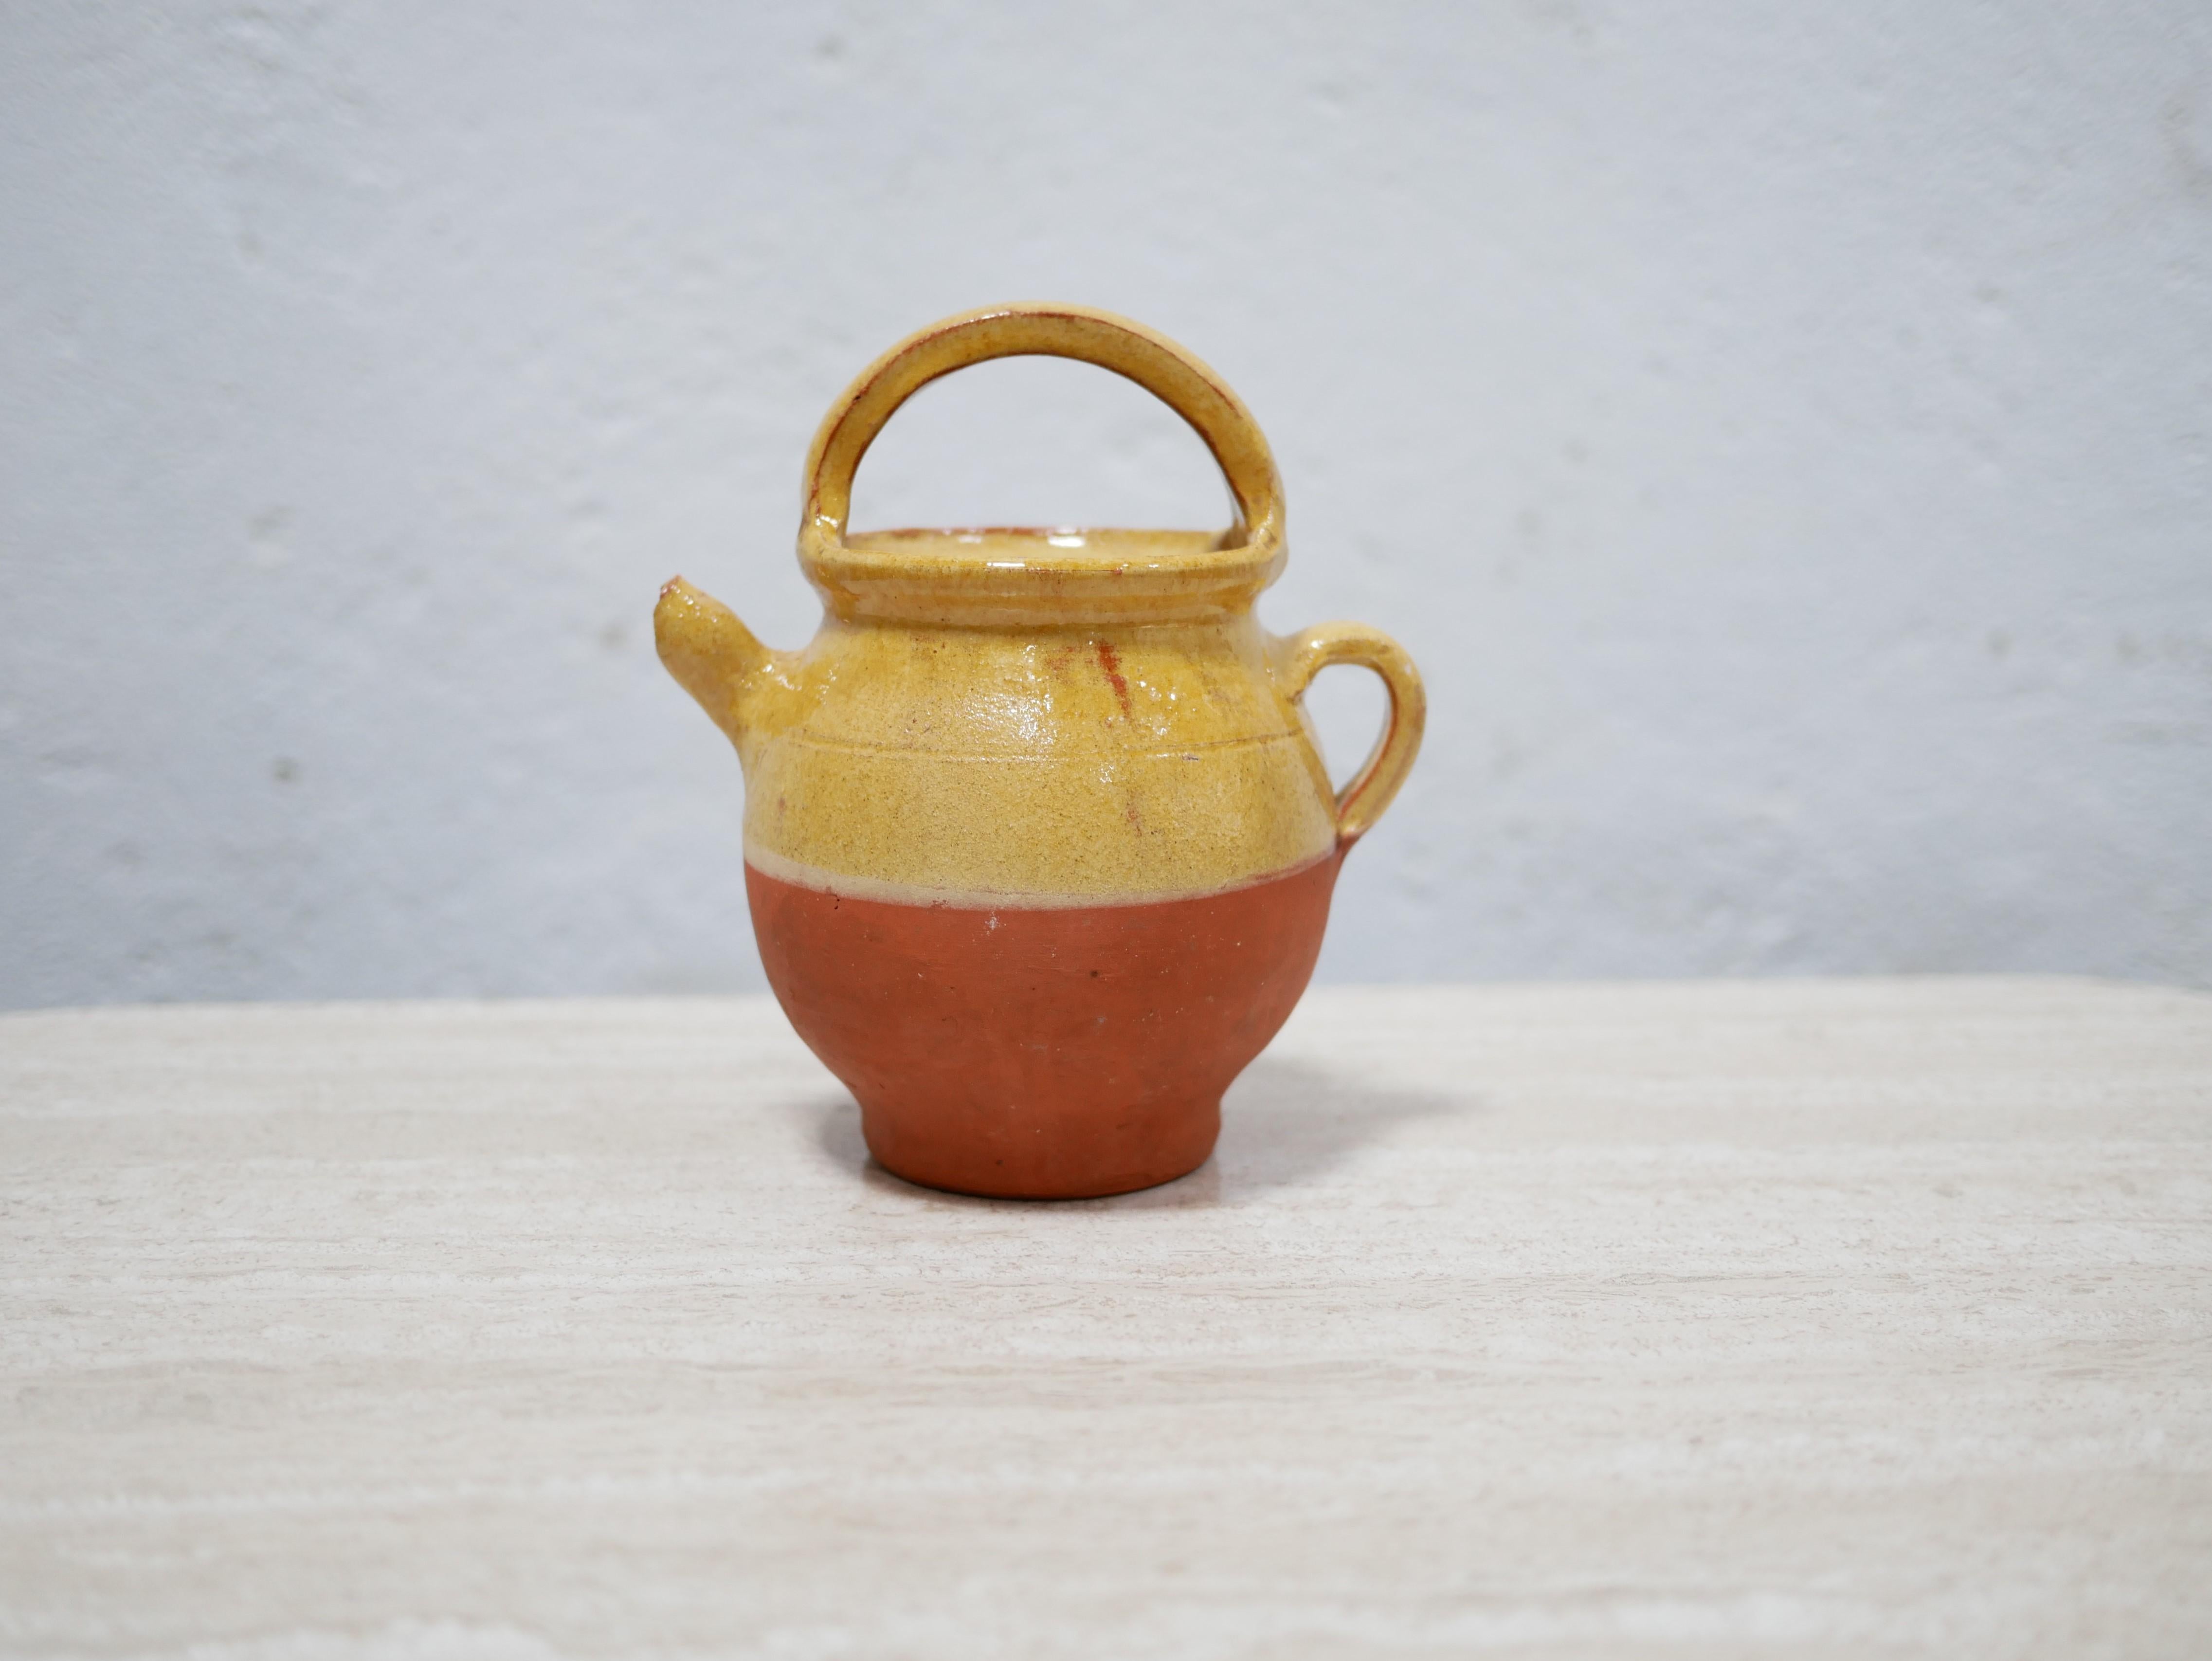 Small glazed terracotta pot designed in France in the 1950s.

With its modern shape and its pretty color, this ceramic will be perfect in a natural, refined and delicate decoration.
We can simply imagine it placed on a shelf or piece of